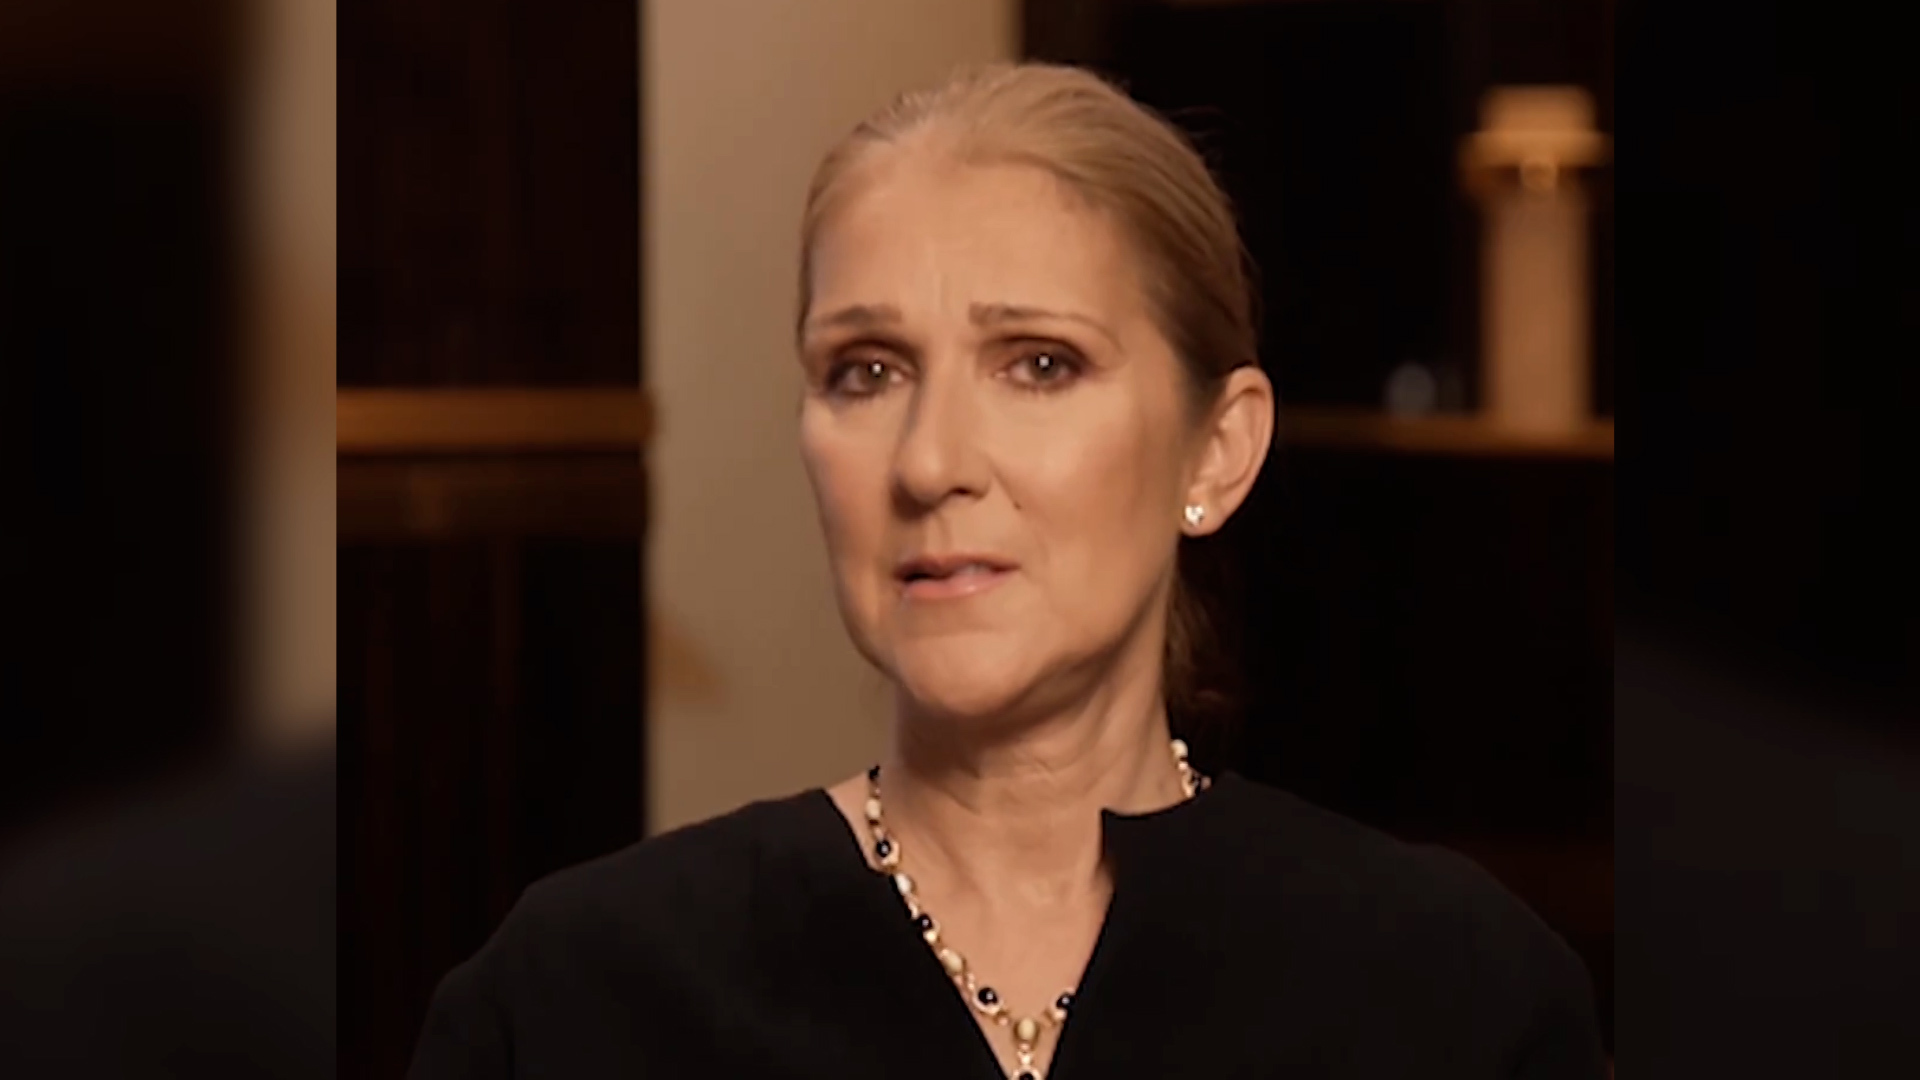 Celine Dion diagnosed with 'Stiff Person Syndrome', an incurable and extremely rare neurological disease